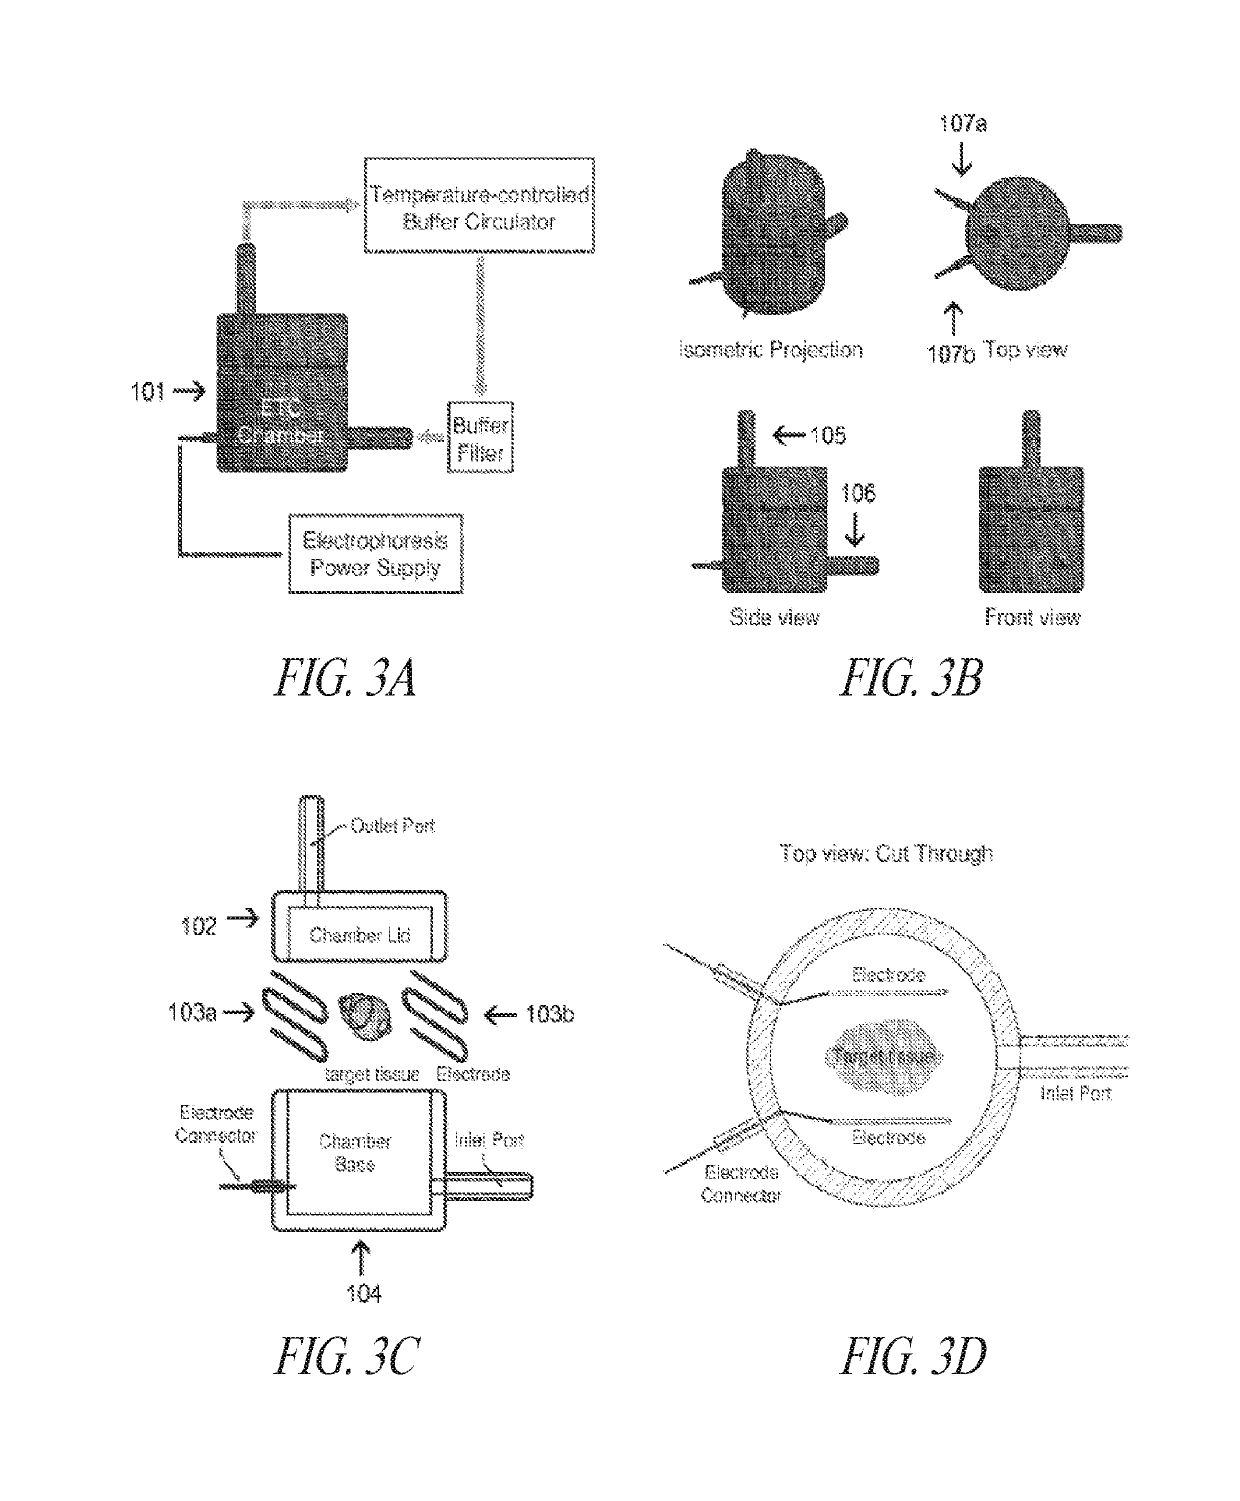 Methods for preparing and analyzing tumor tissue samples for detection and monitoring of cancers